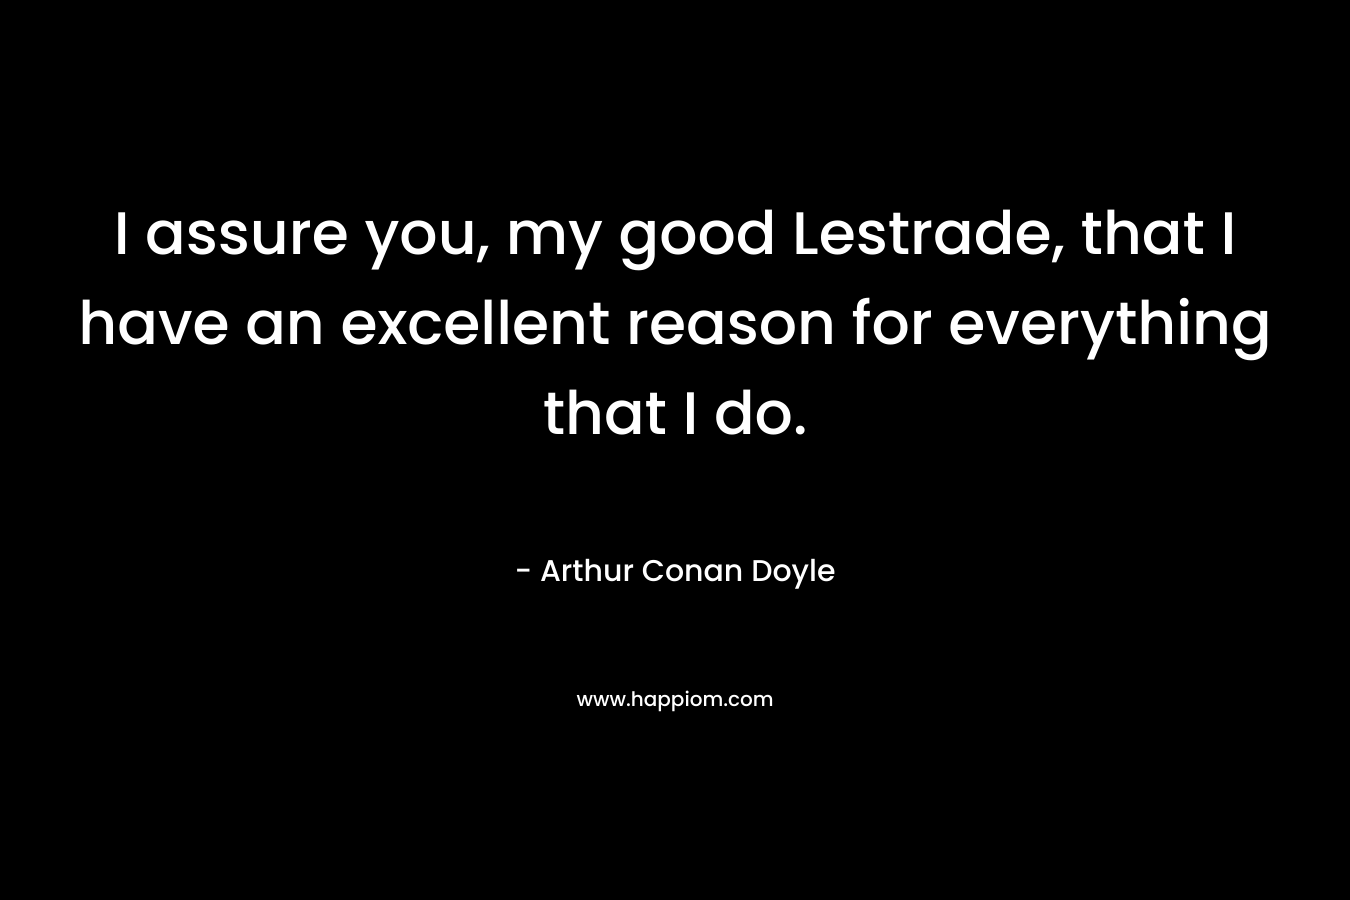 I assure you, my good Lestrade, that I have an excellent reason for everything that I do.